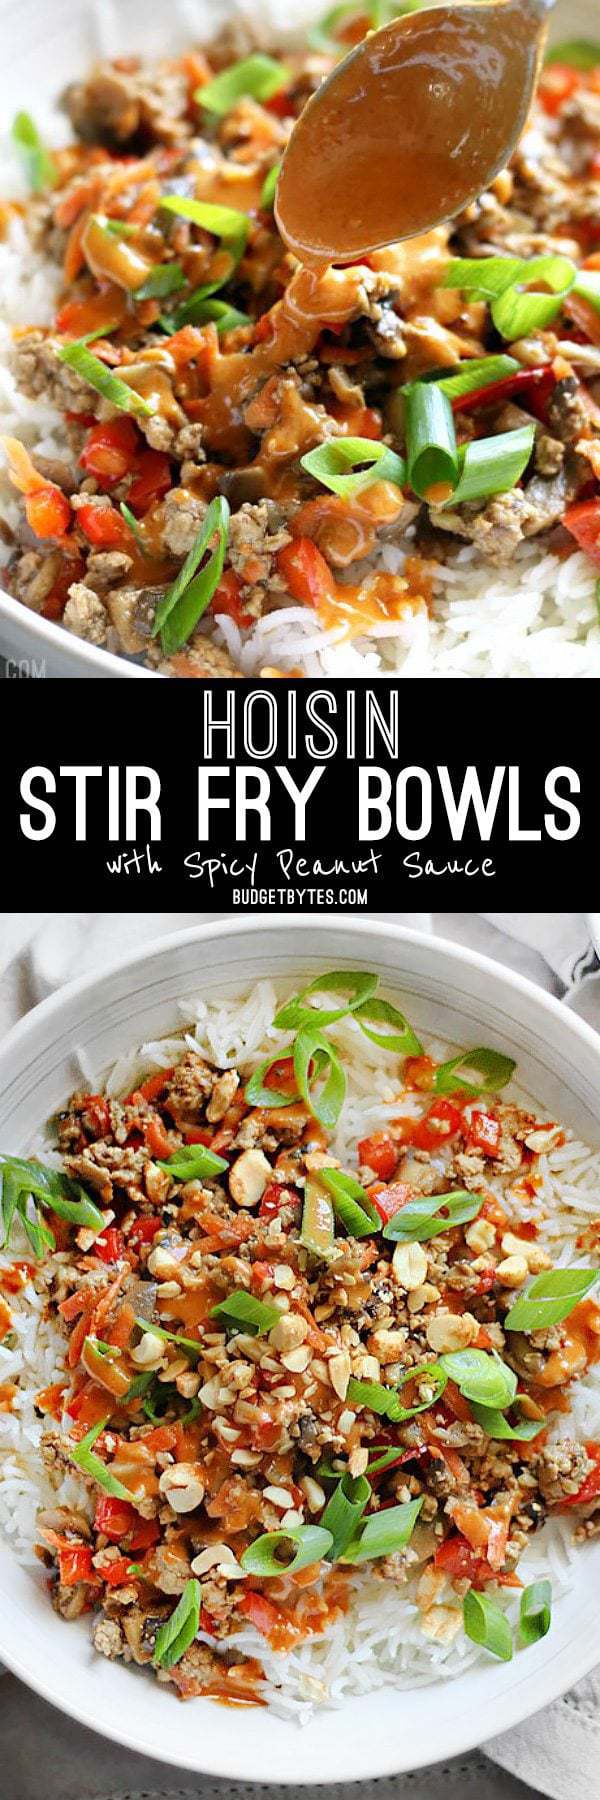 Hoisin Stir Fry Bowls with a rich and spicy peanut sauce are a fast answer to dinner with tons of color, texture, and flavor. Use pork, chicken, or turkey! BudgetBytes.com